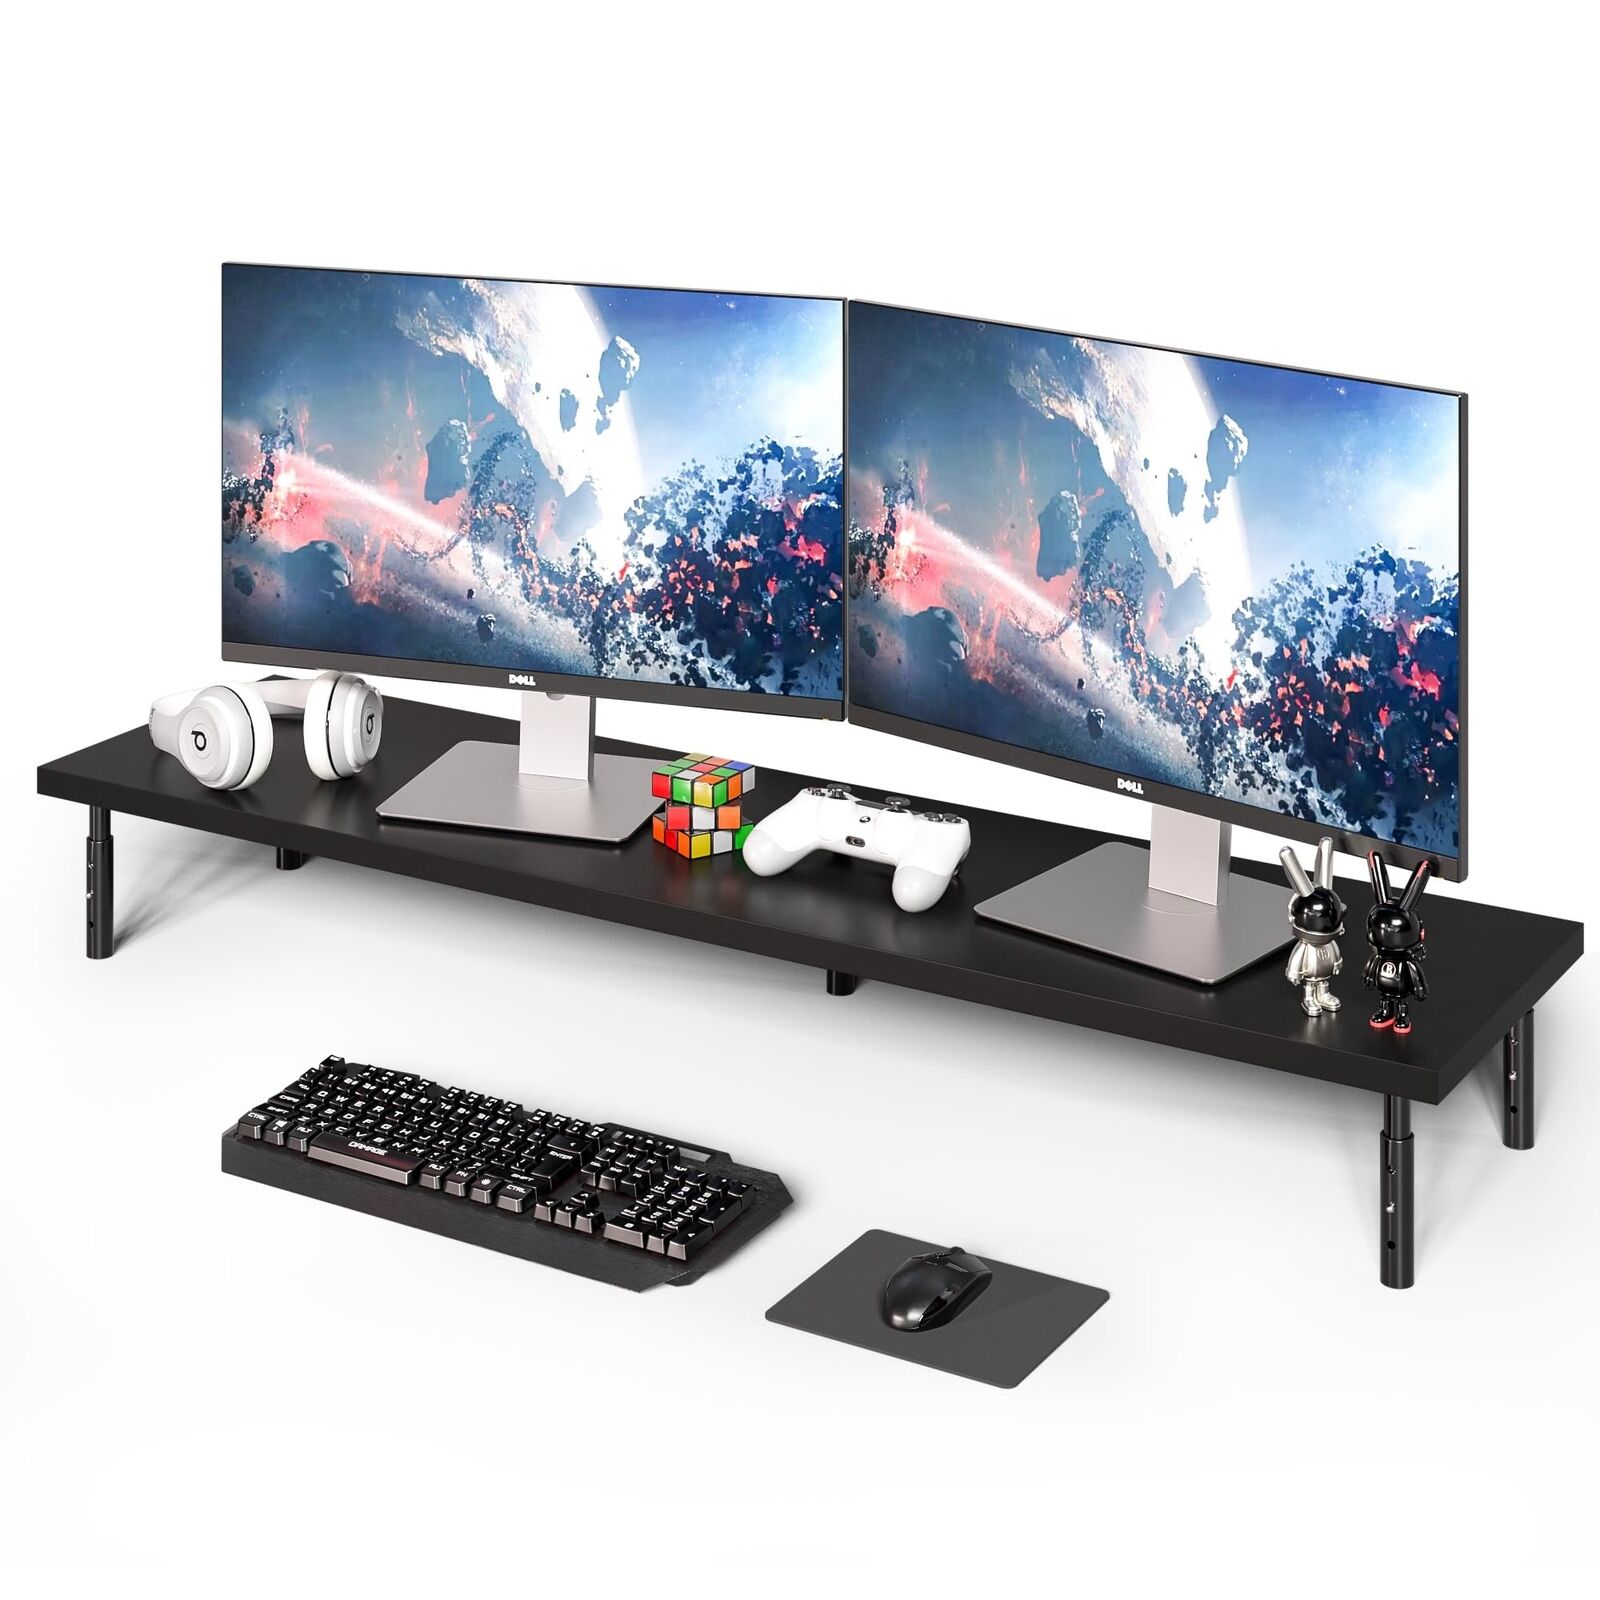 Weenson Dual Monitor Stand for Desk-Black Bamboo Monitor Stand Riser for 2 Mo...